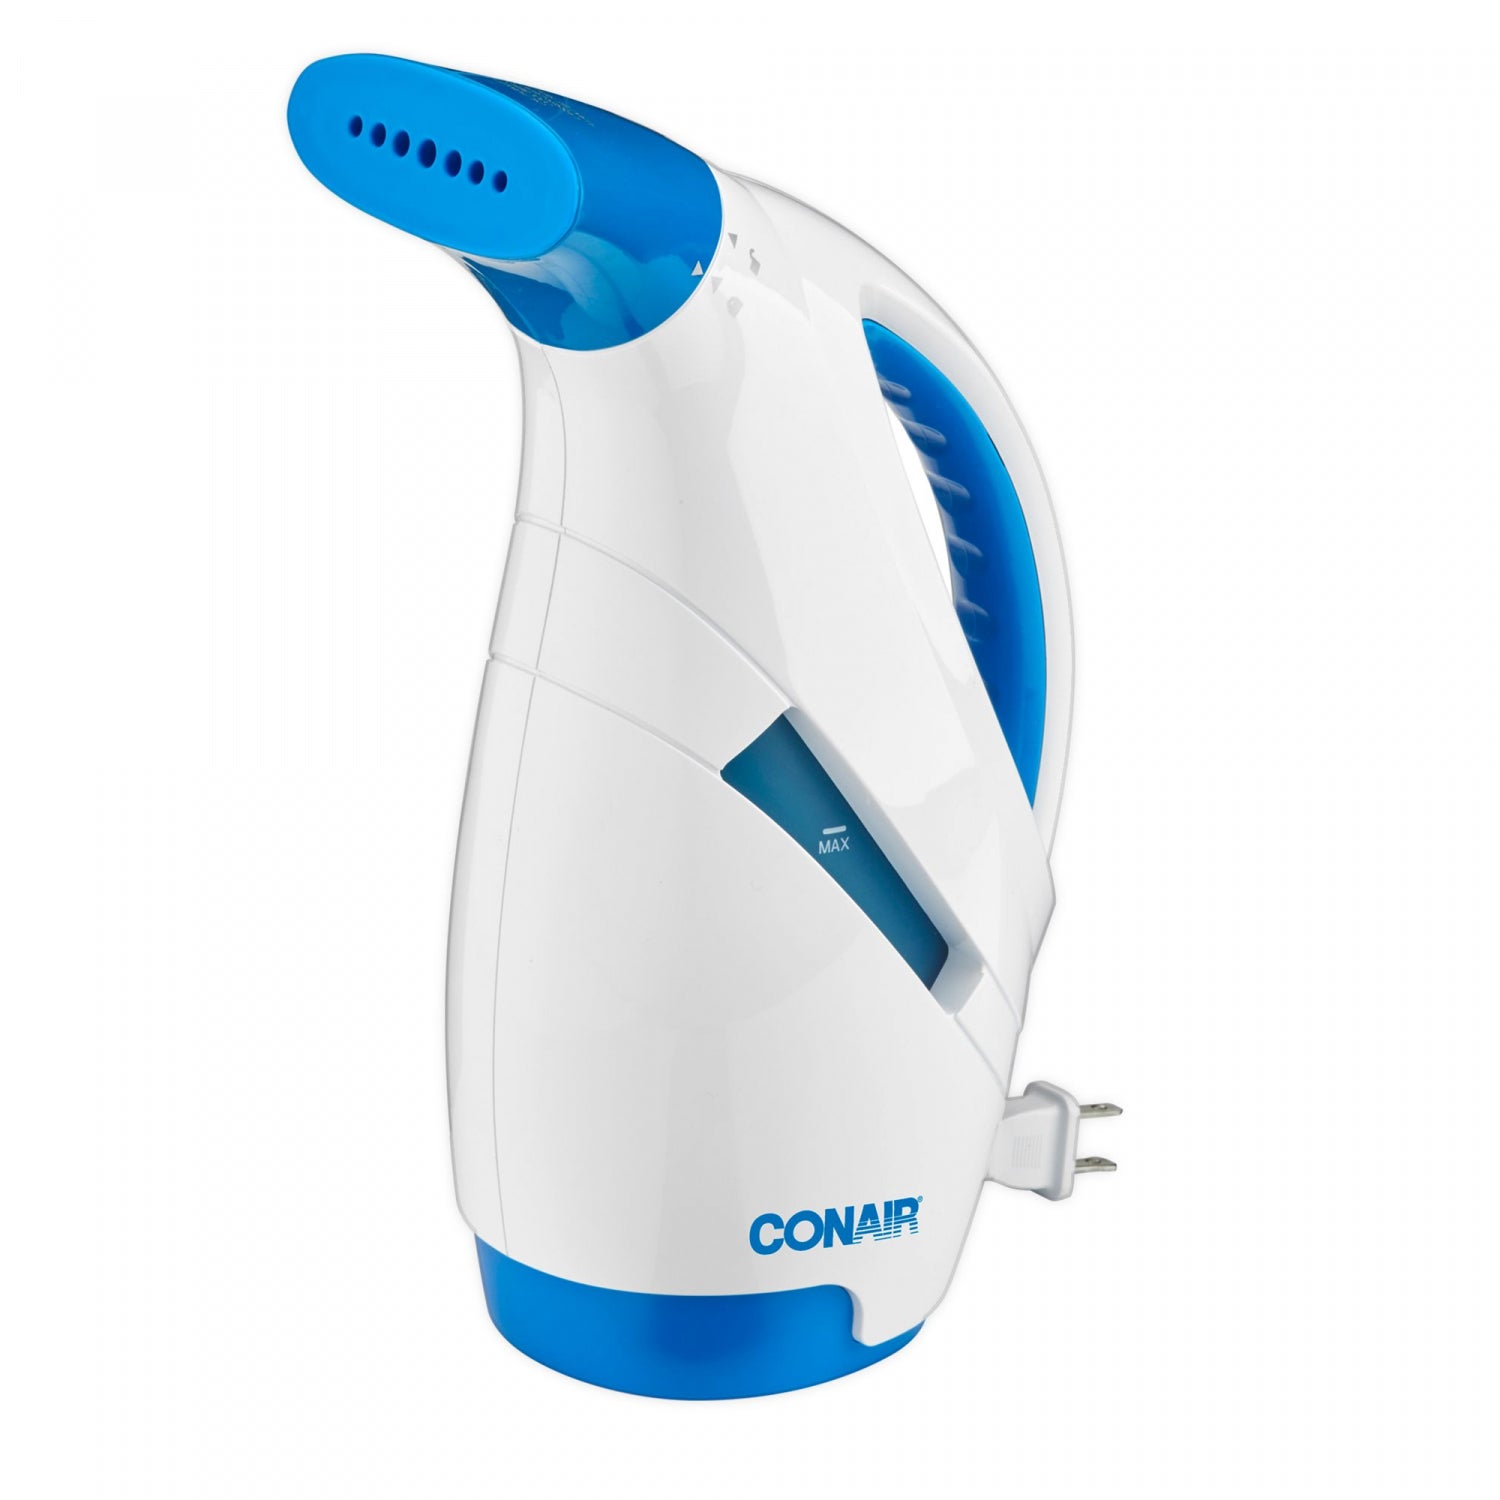 Conair Deluxe Garment Steamer with Cord Reel | MrOrganic Store